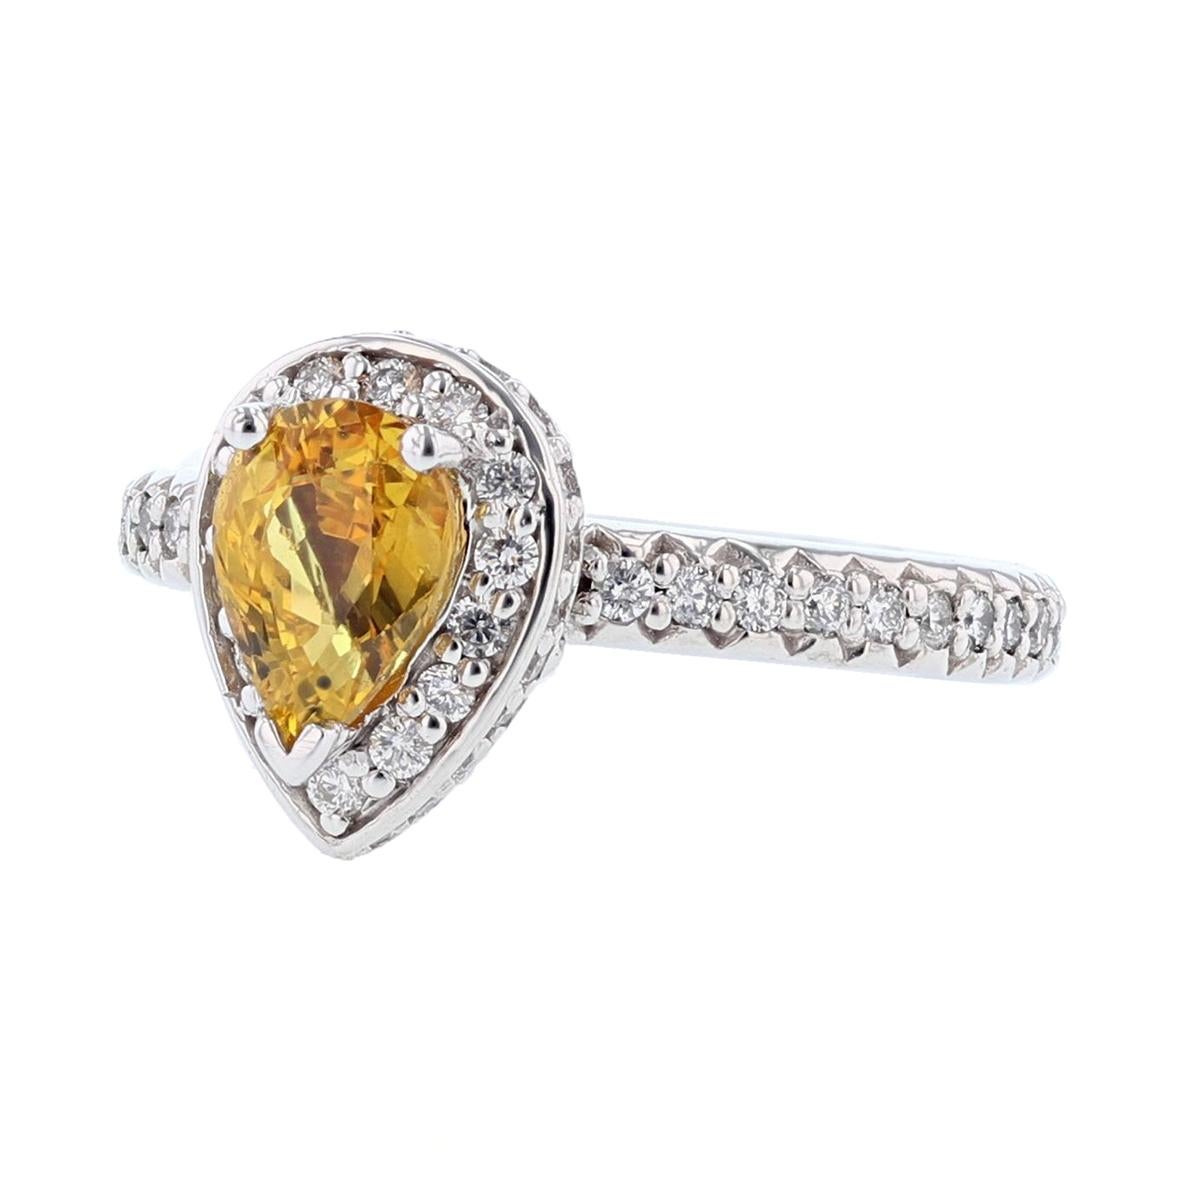 This ring is set in 14 karat white gold. The center stone is a Pear shaped Yellow Sapphire weighing 1.40 carats and is prong set. The mounting features 78 round cut, prong set diamonds weighing 0.68cts.